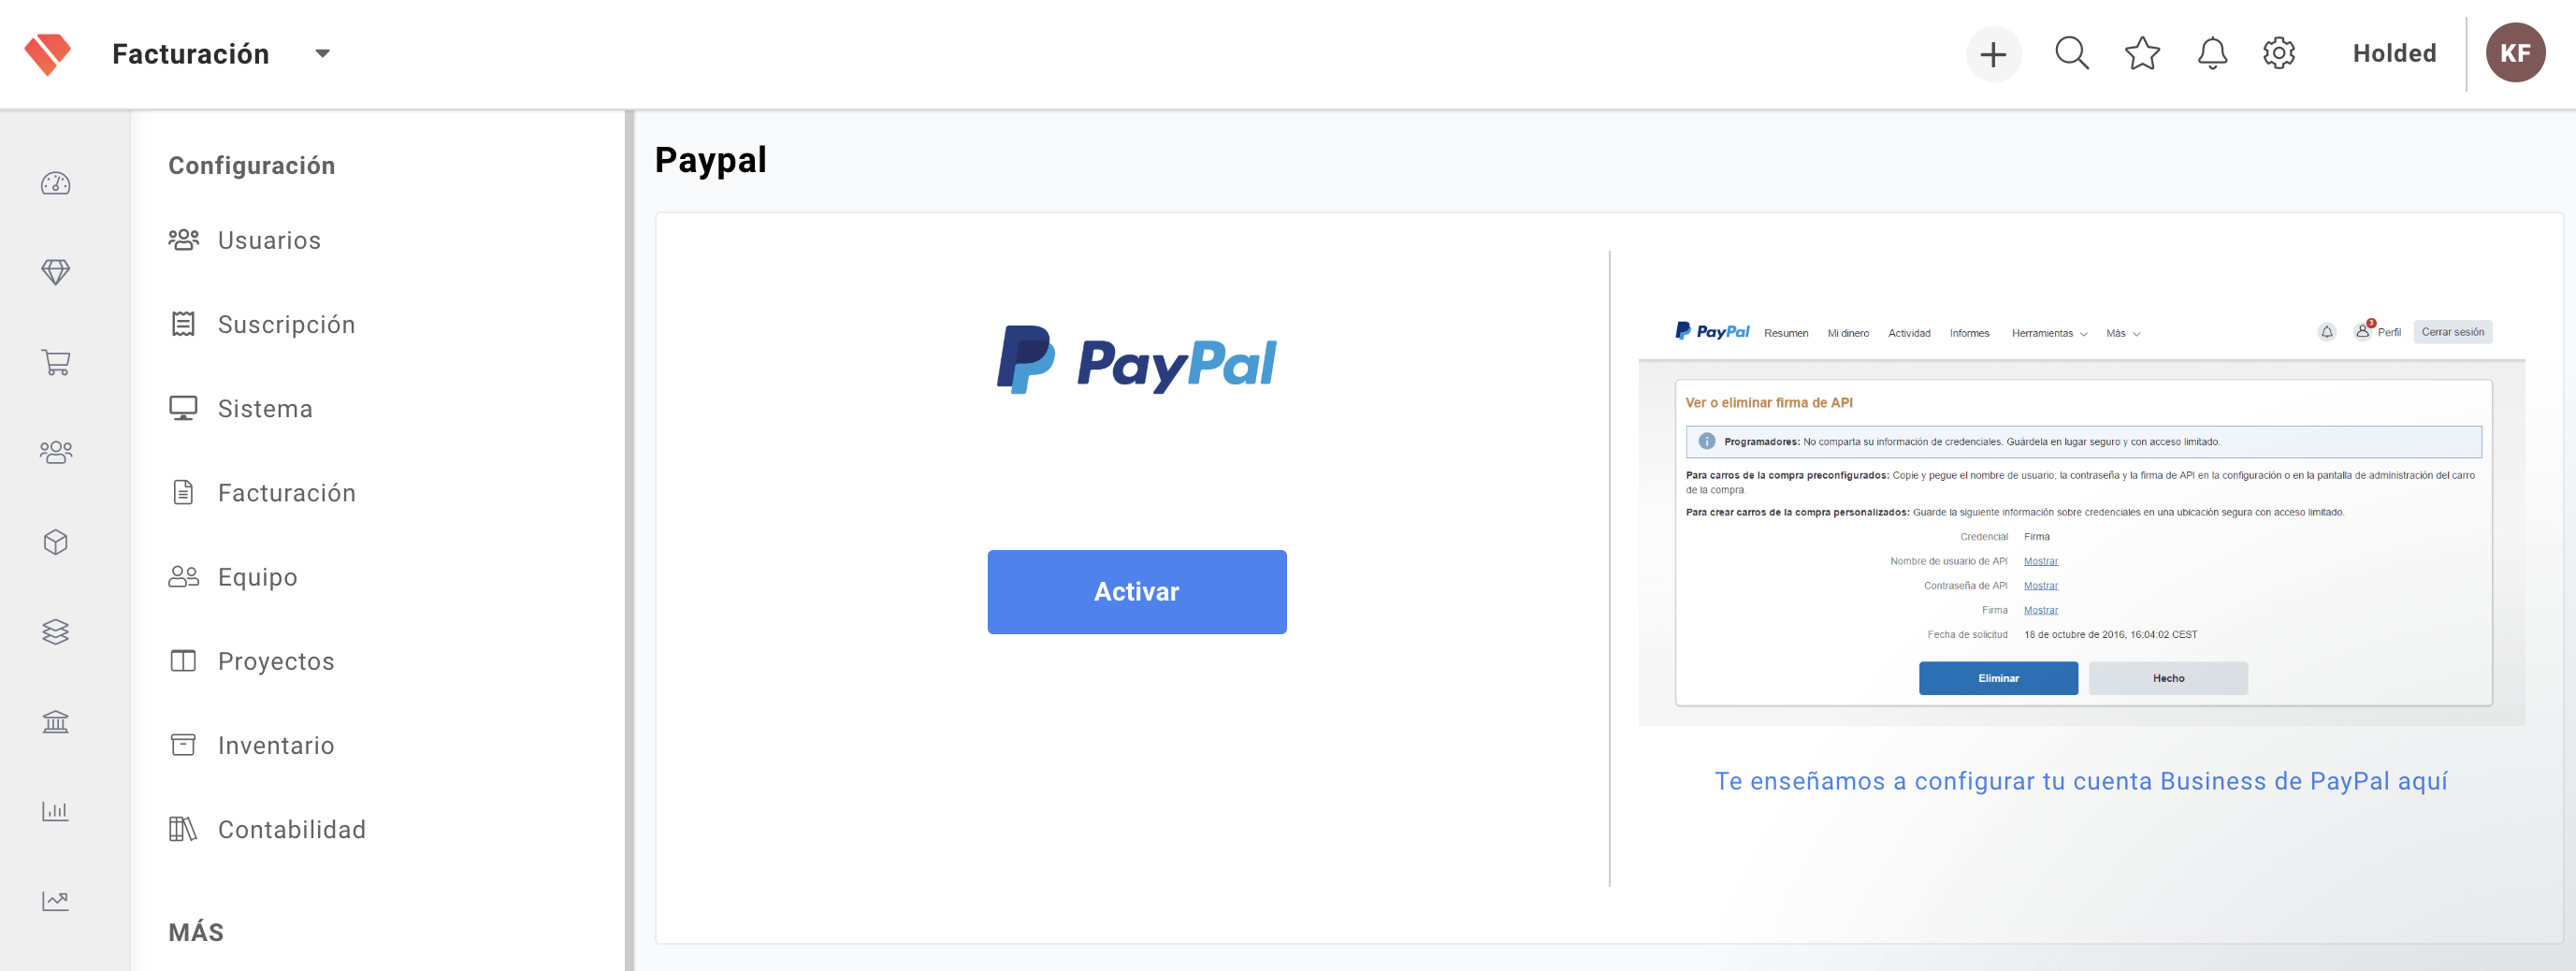 paypal business holded